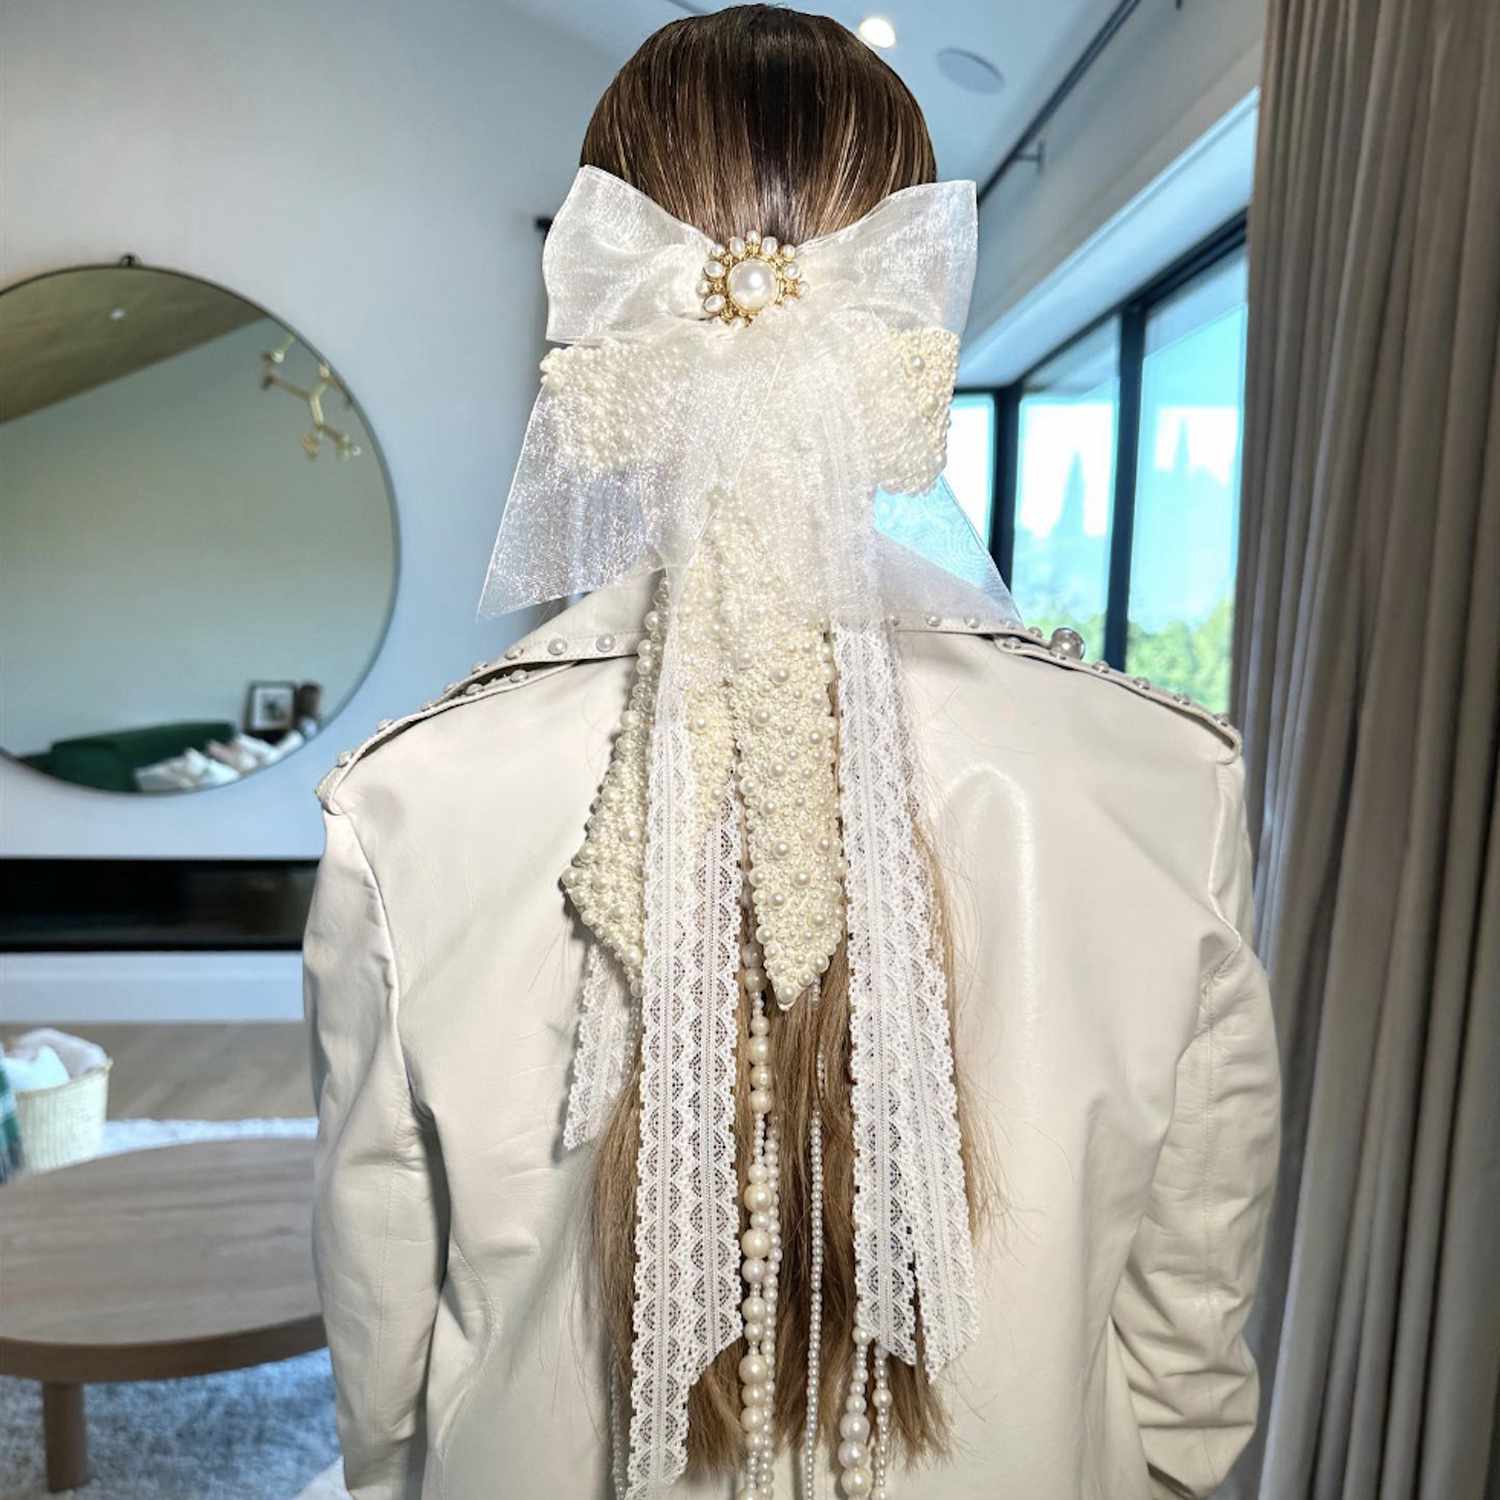 Back view of low ponytail hairstyle accented with bows, white ribbons, and pearl strings